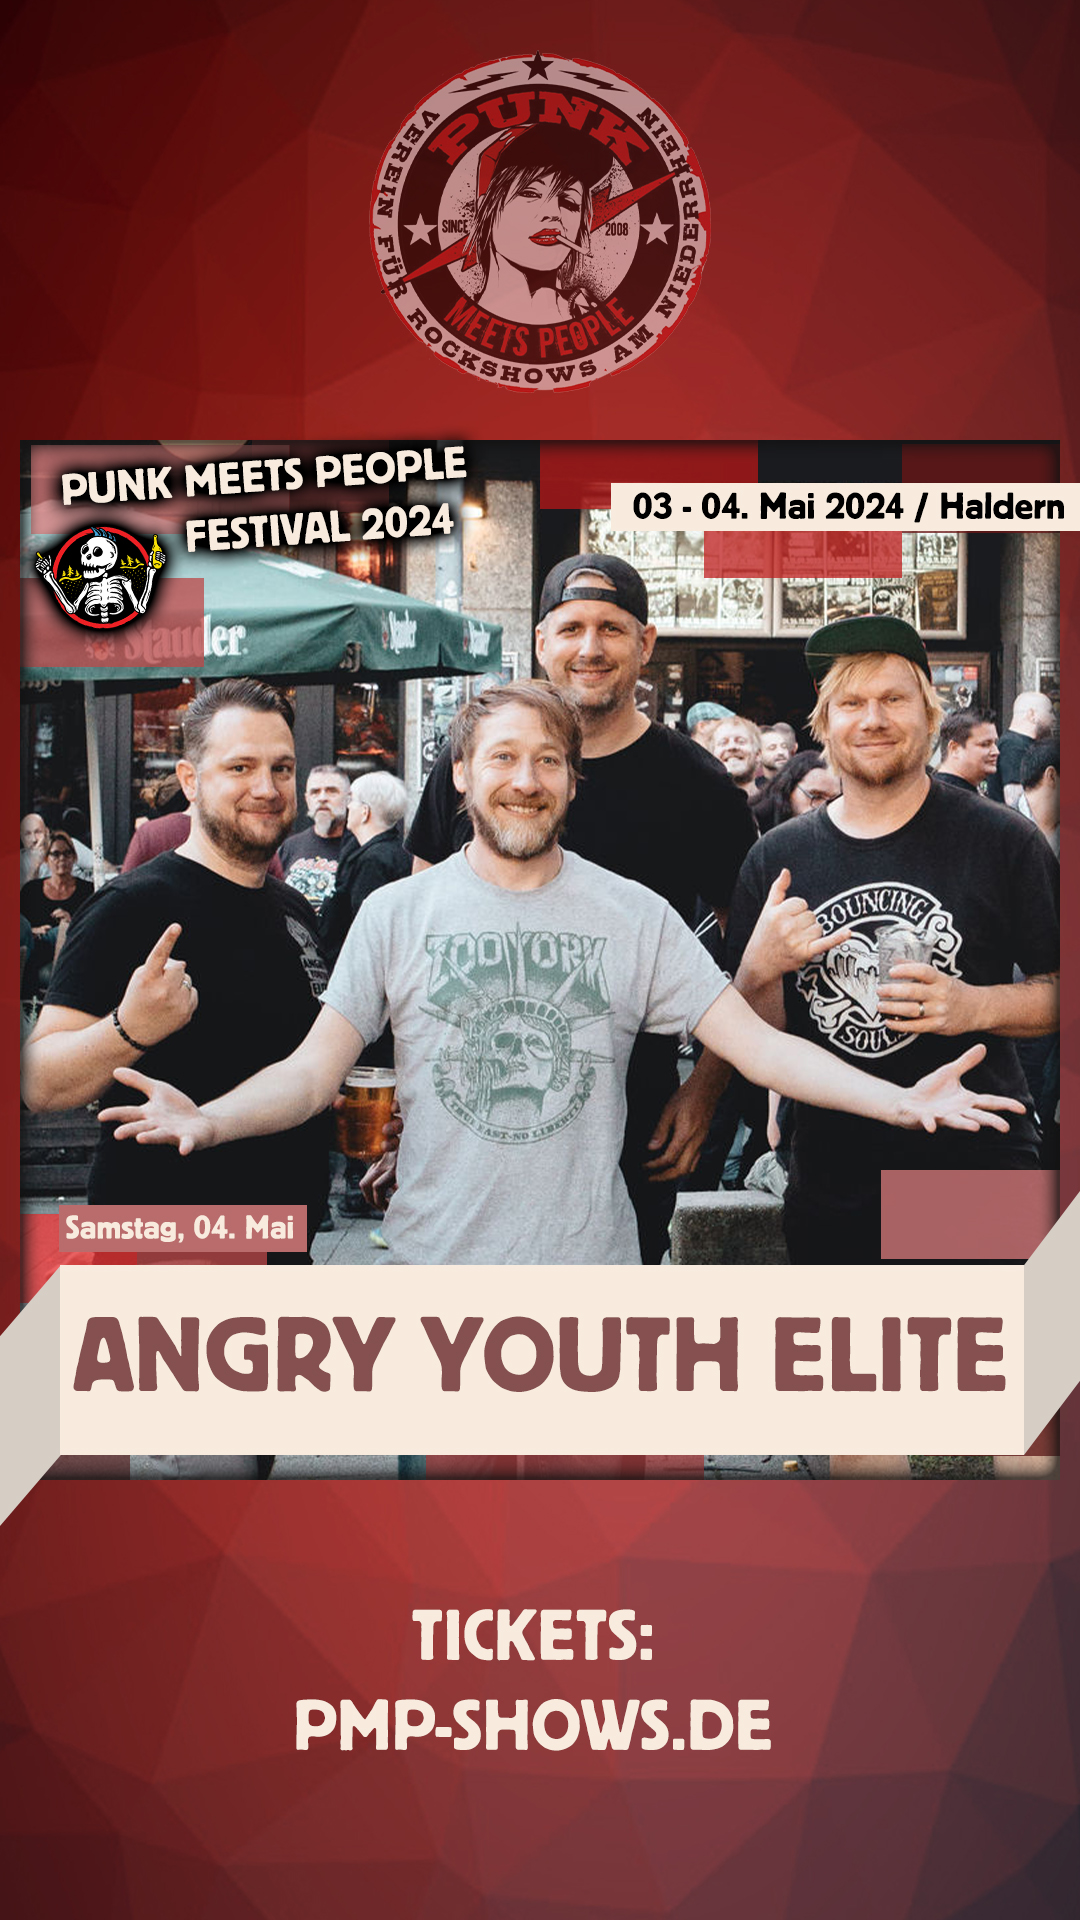 ANGRY YOUTH ELITE